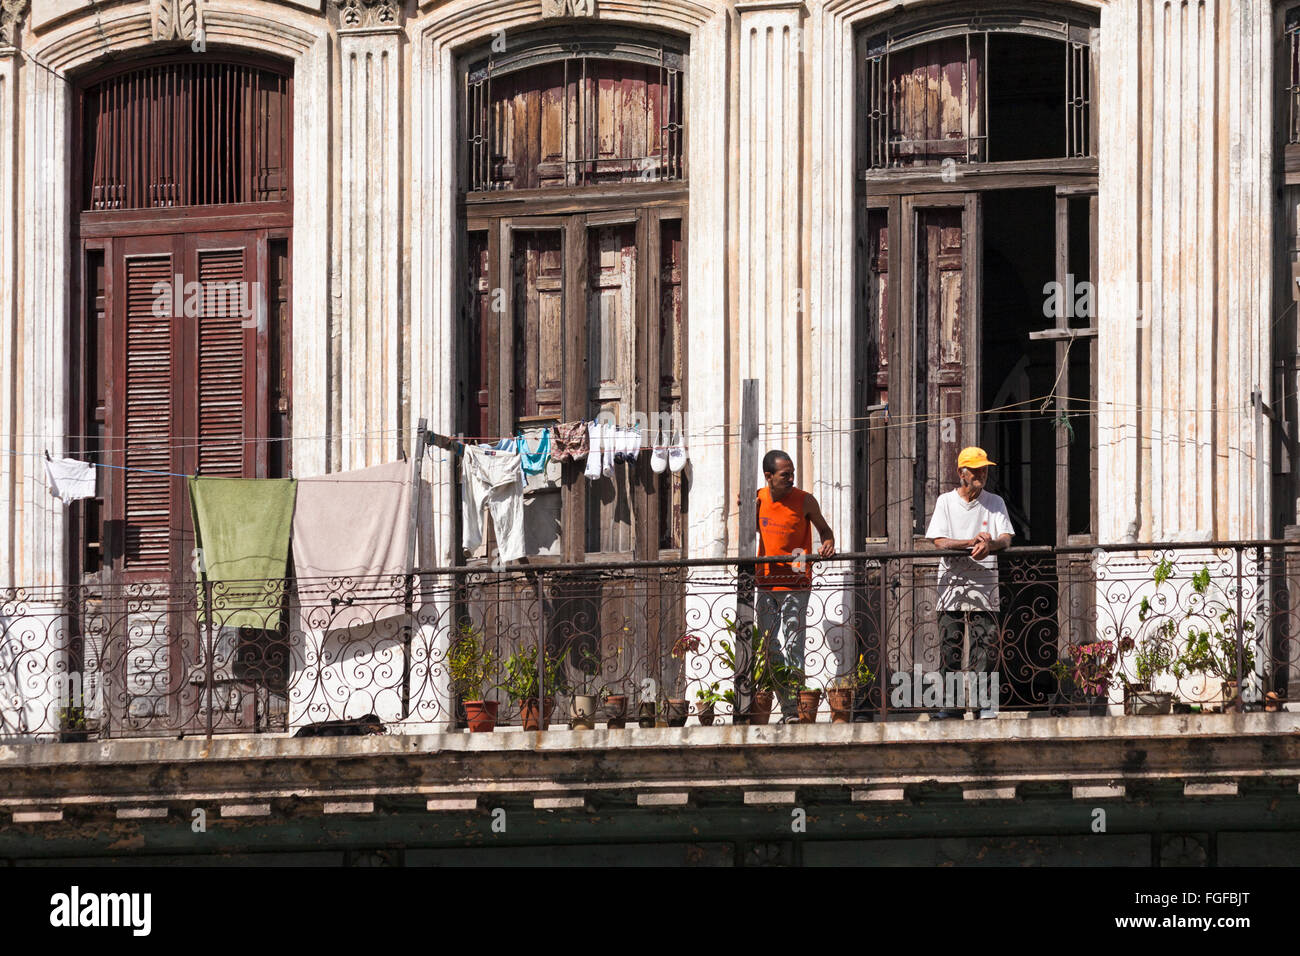 Daily life in Cuba - Cuban men leaning on balcony railings with washing hung out to dry at Havana, Cuba, West Indies, Caribbean, Central America Stock Photo